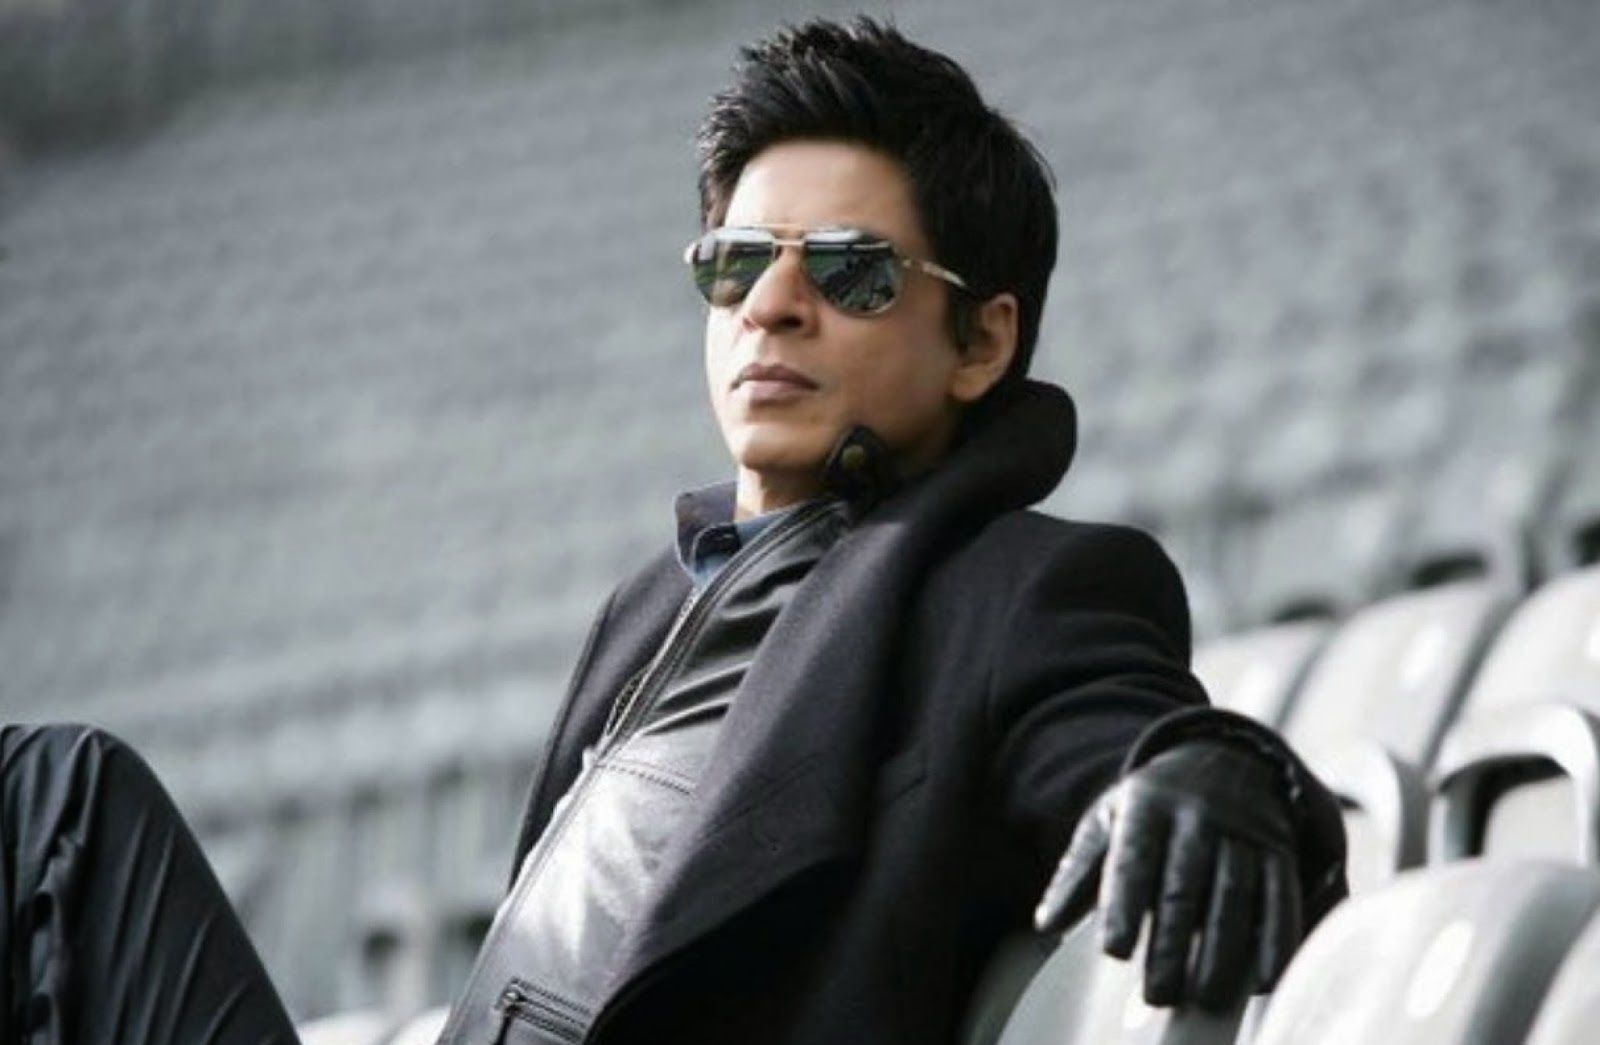 Guess which shows did King Khan do before becoming a bollywood starâ€ ?